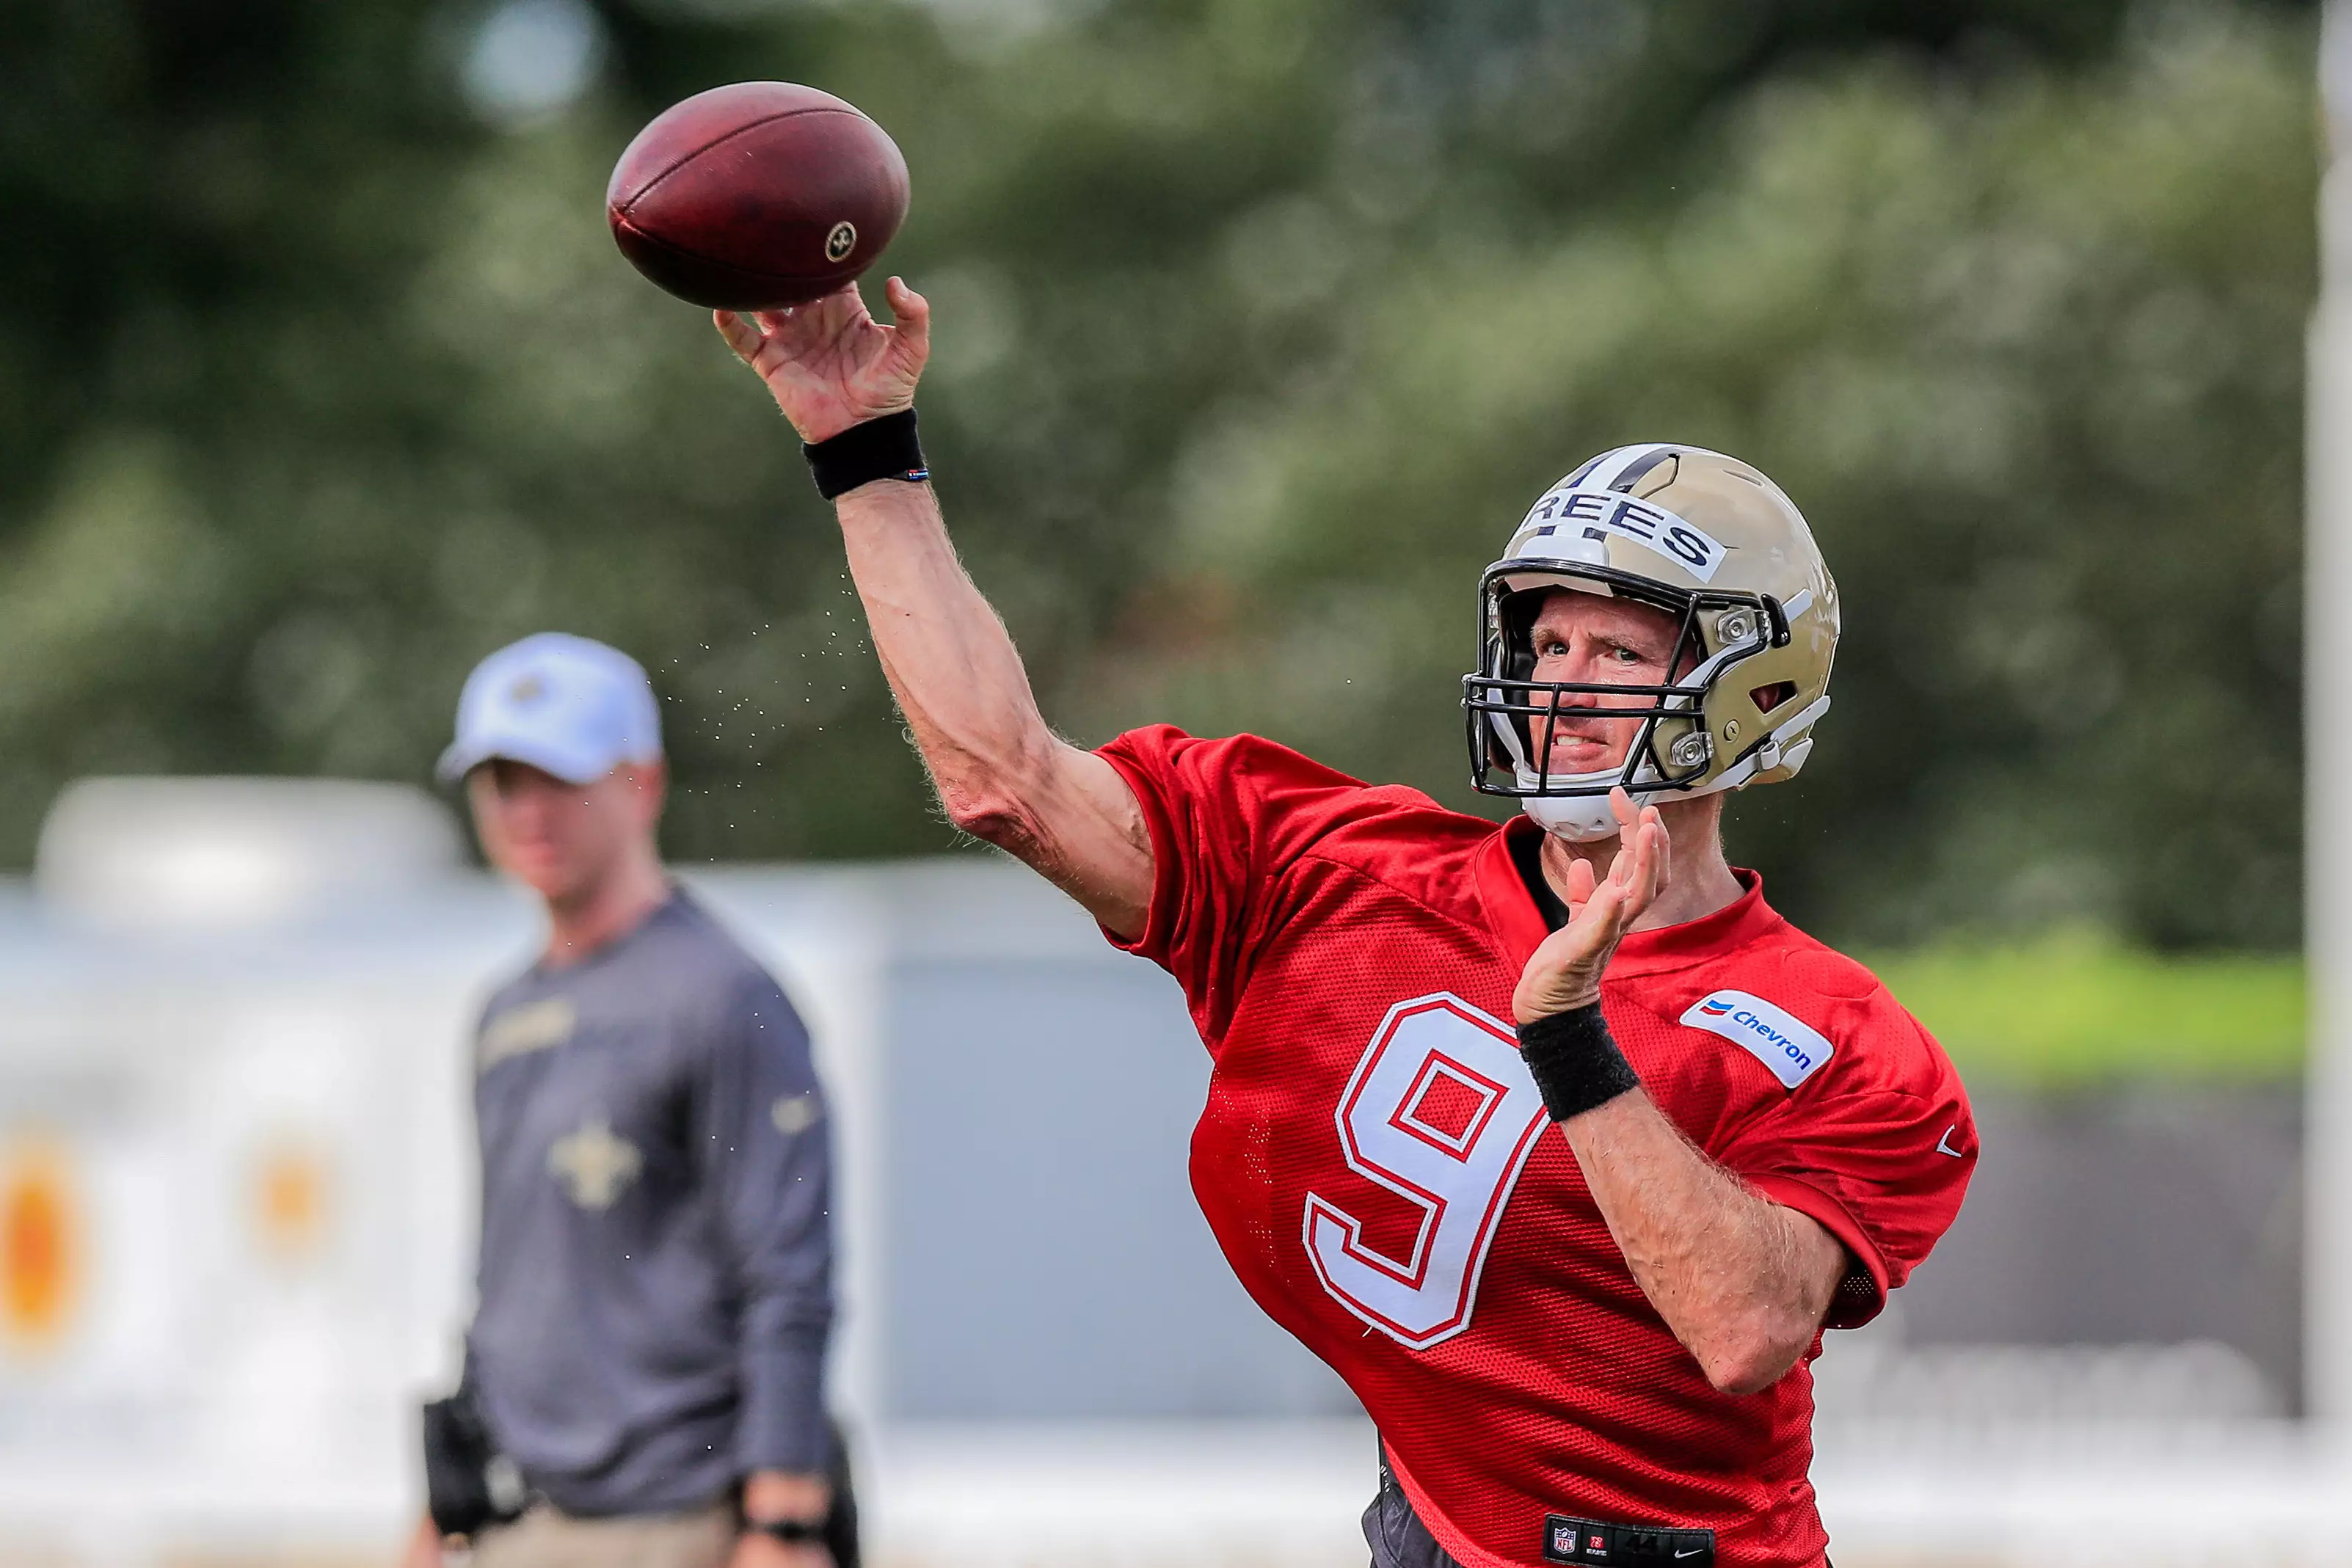 New Orleans Saints quarterback Drew Brees is set for his 19th season in the NFL